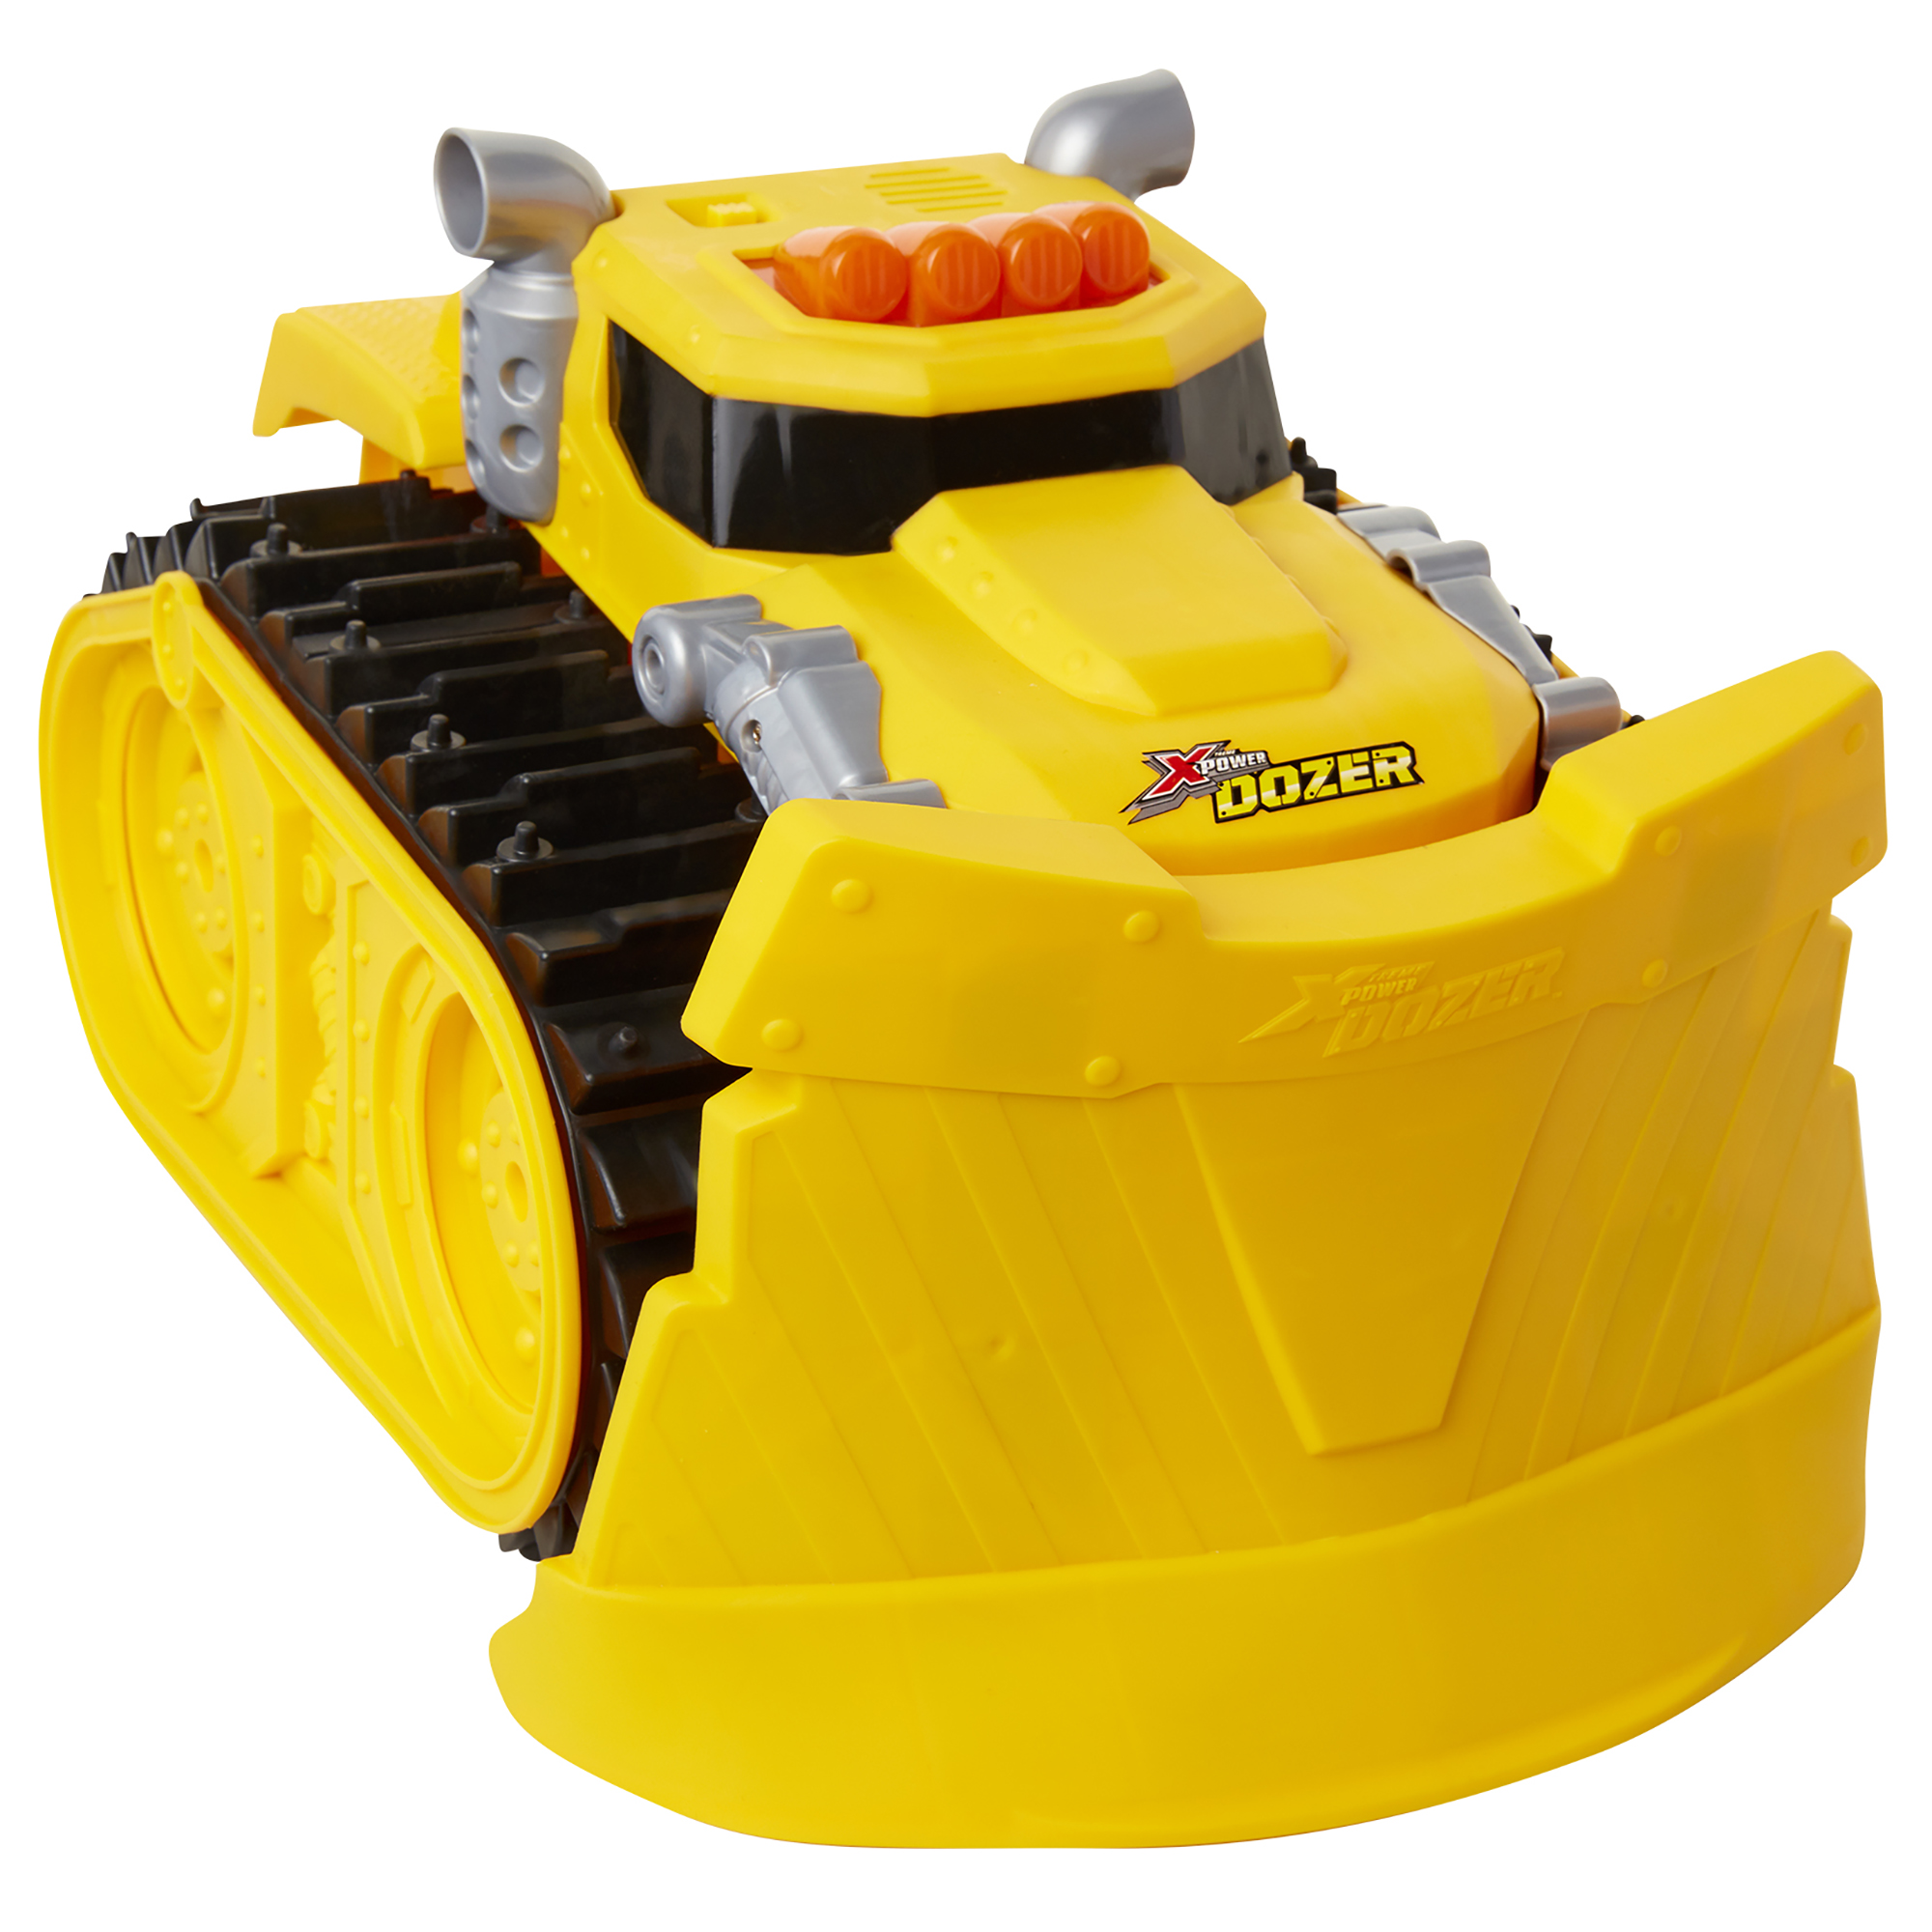 Xtreme Power Dozer - Motorized Extreme Bulldozer Toy Truck for Toddler Boys & Kids Who Love Construction ToysPlow Through Dirt, Toys, Wood, Rocks-Indoor & Outdoor Play-Spring Summer Fall Winter - image 9 of 9